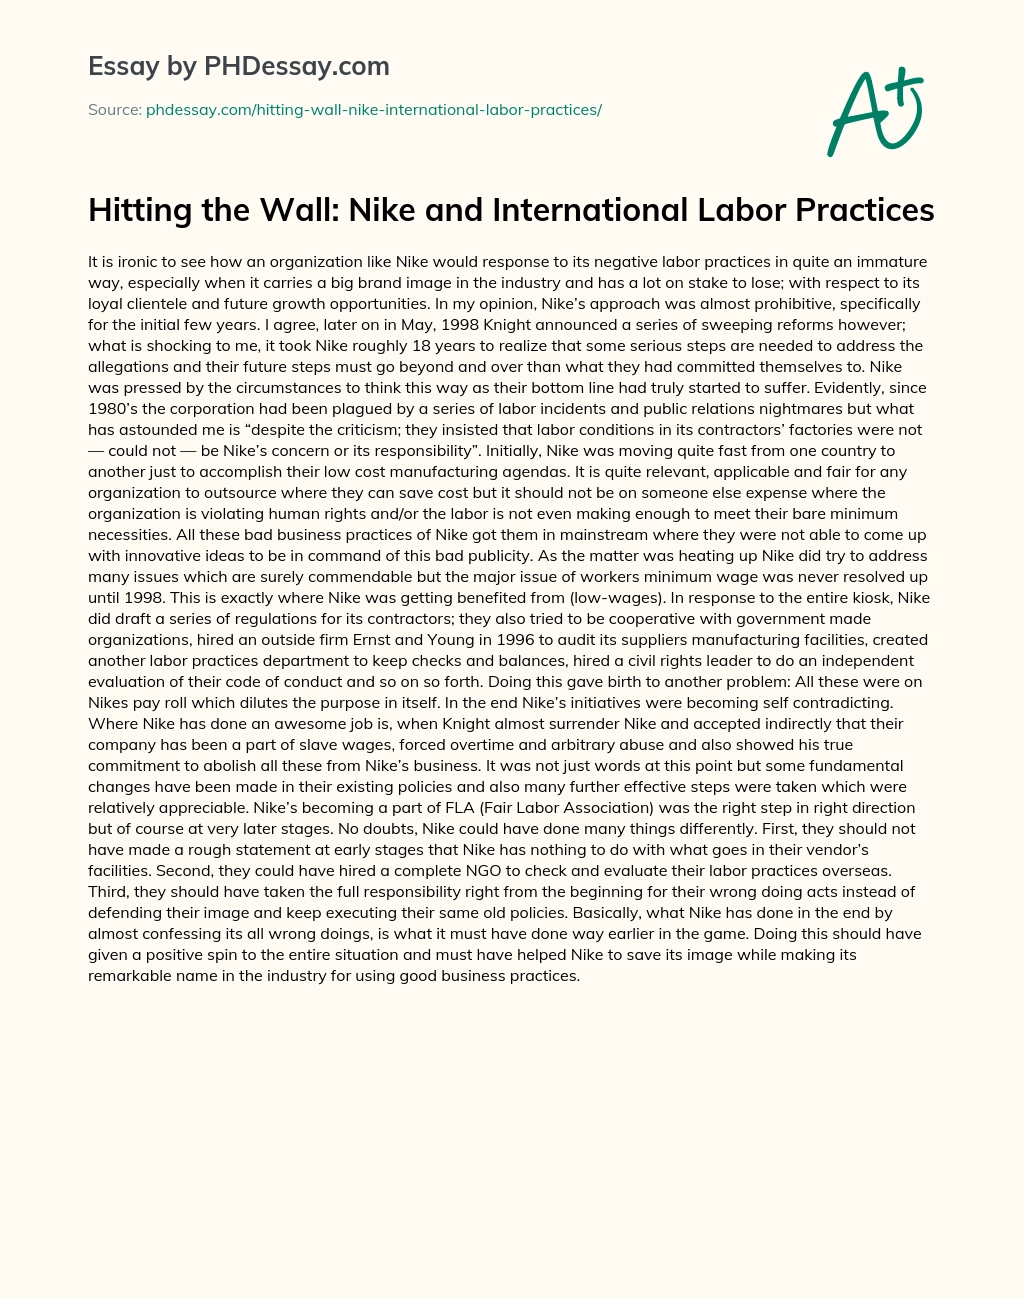 Hitting the Wall: Nike and International Labor Practices essay